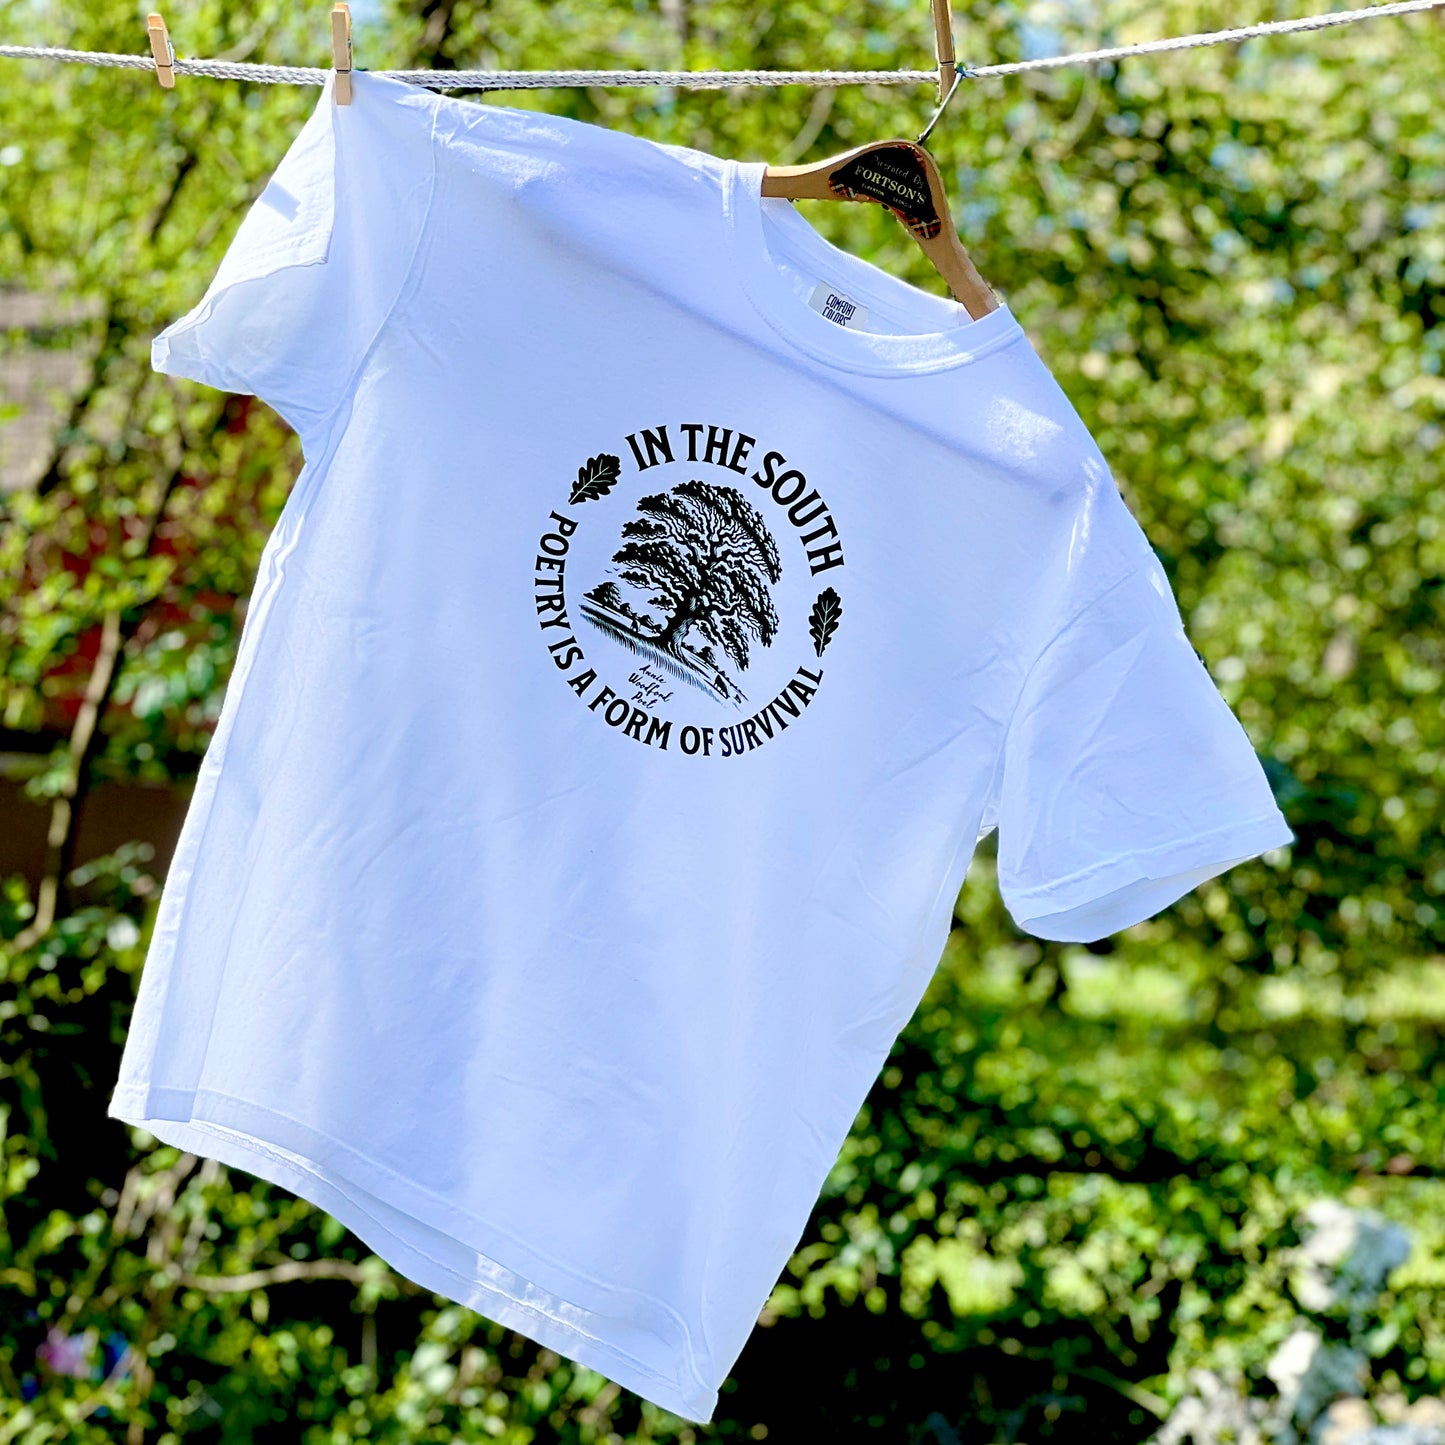 The Poetry Is Survival T-shirt